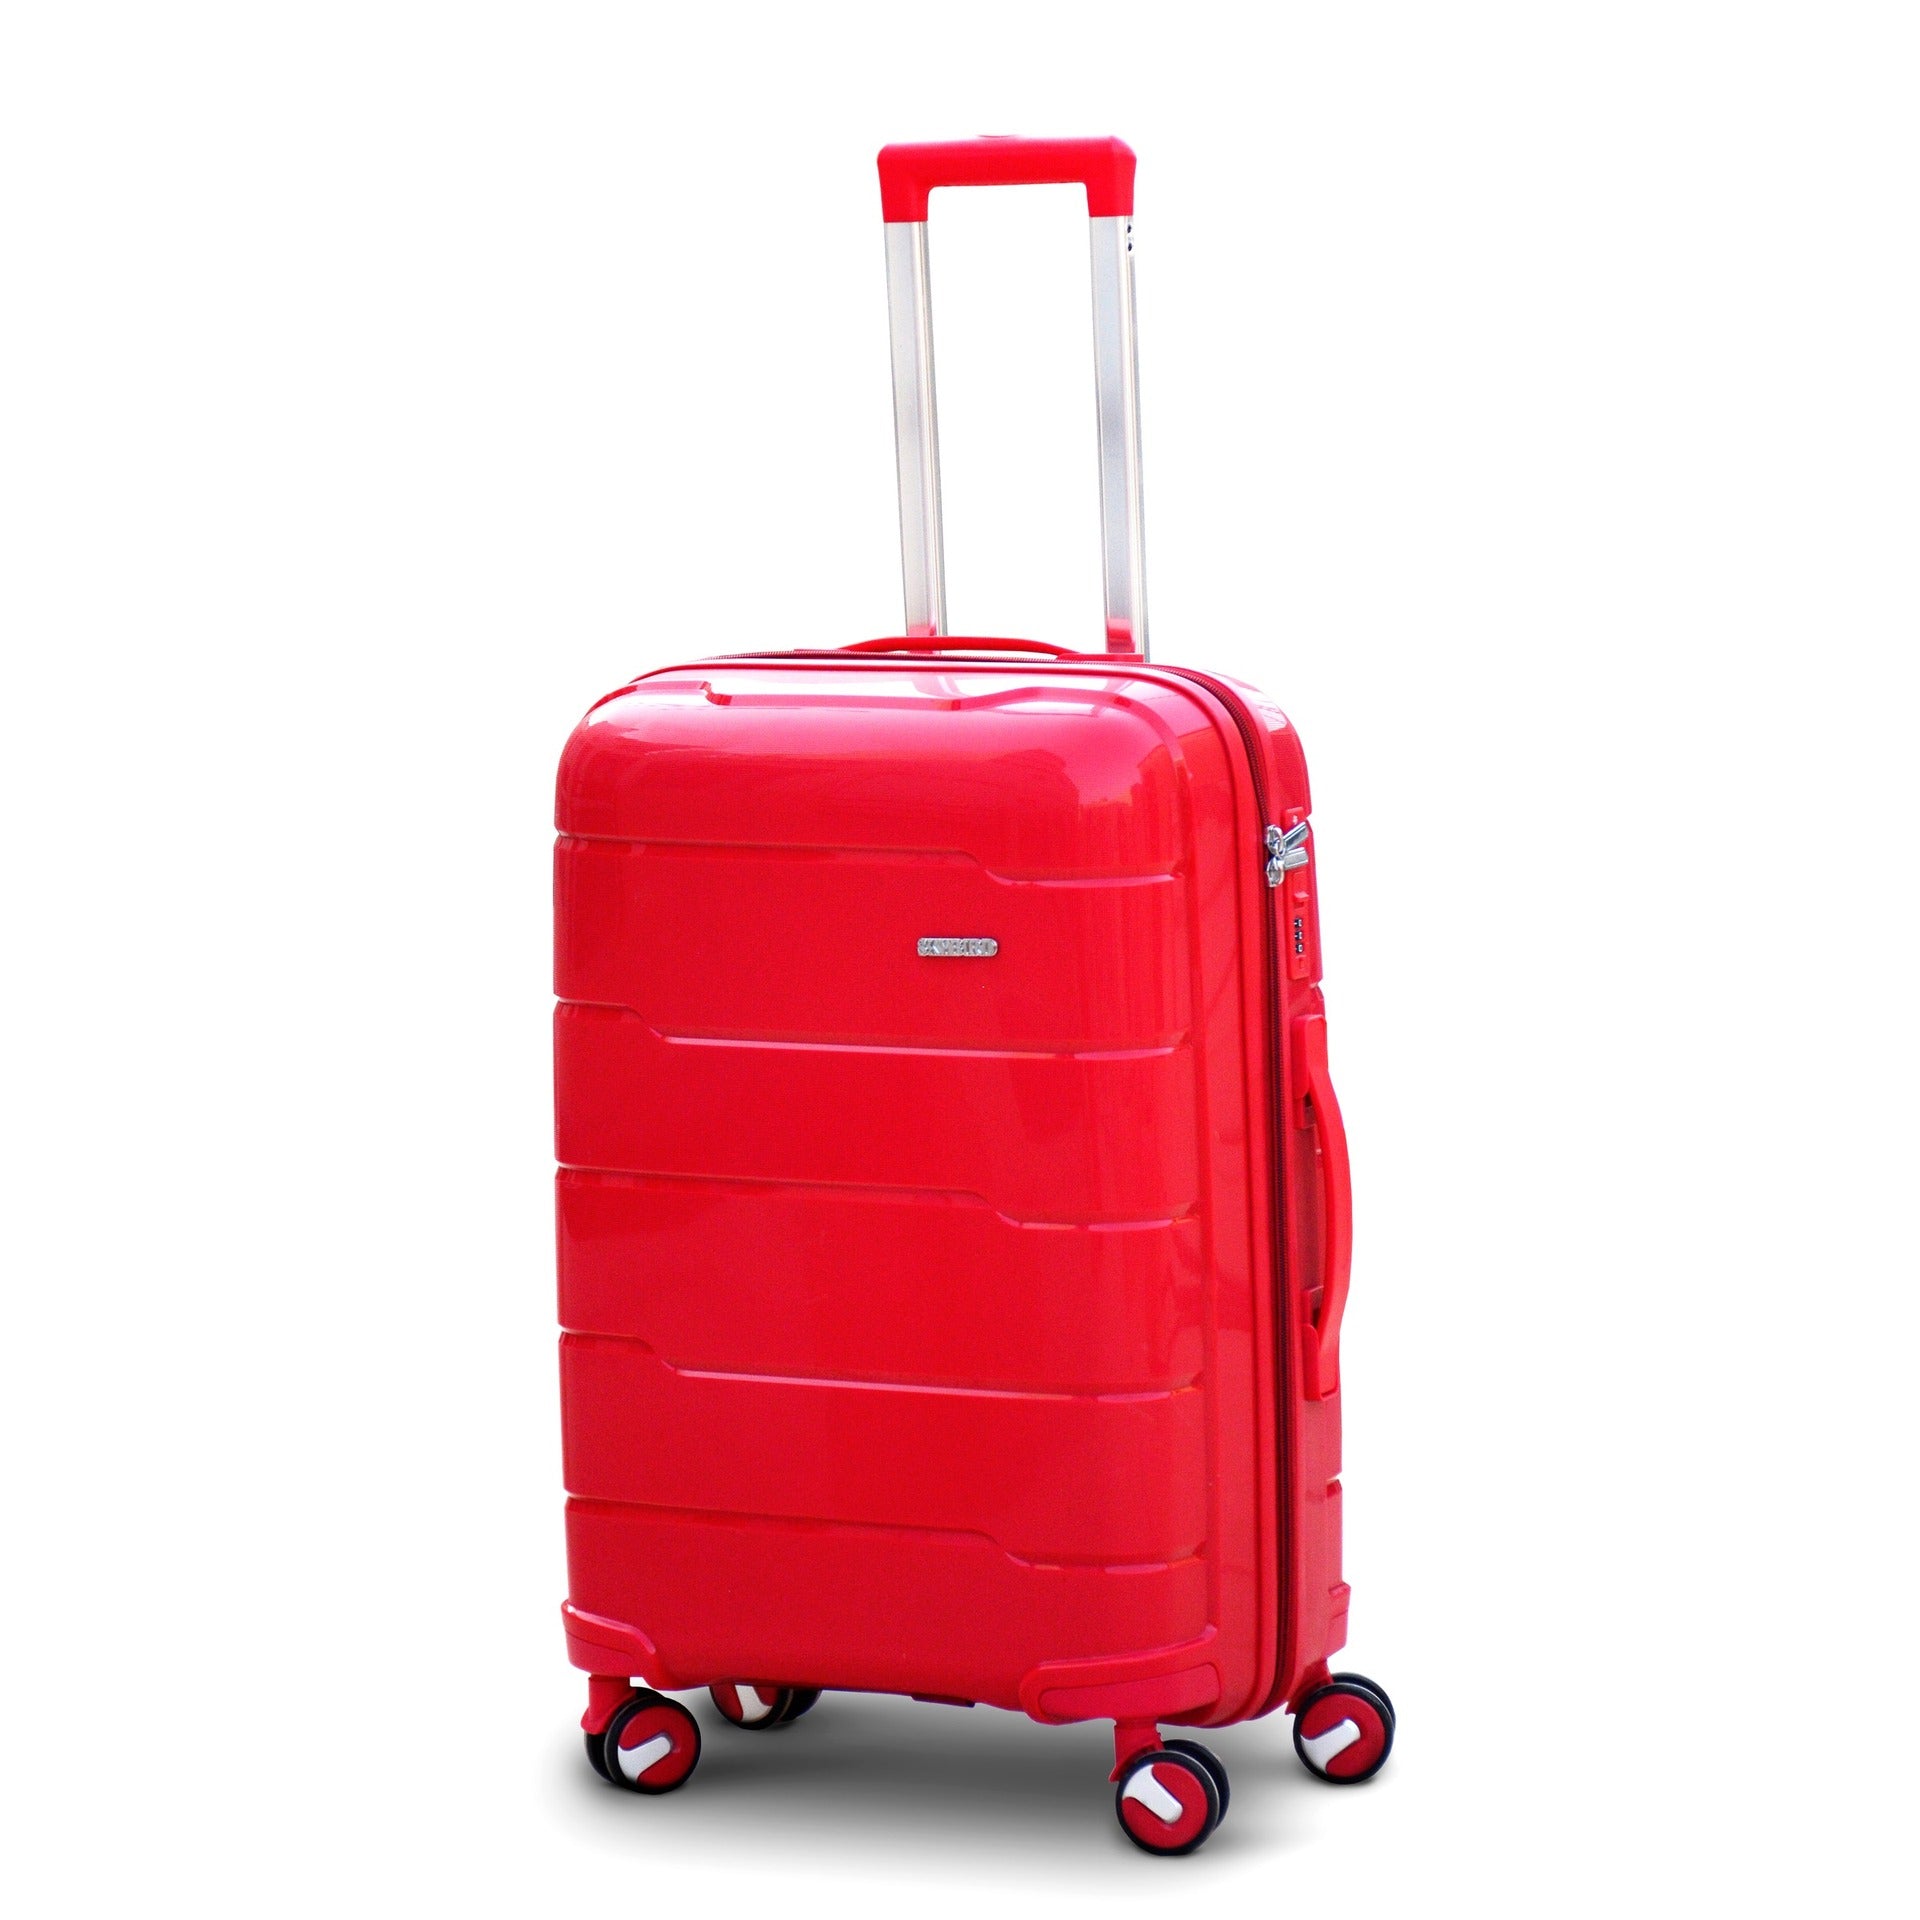 3 Piece Full Set 20" 24" 28 Inches Red Colour Non Expandable Ceramic Smooth PP Luggage lightweight Hard Case Trolley Bag With Double Spinner Wheel